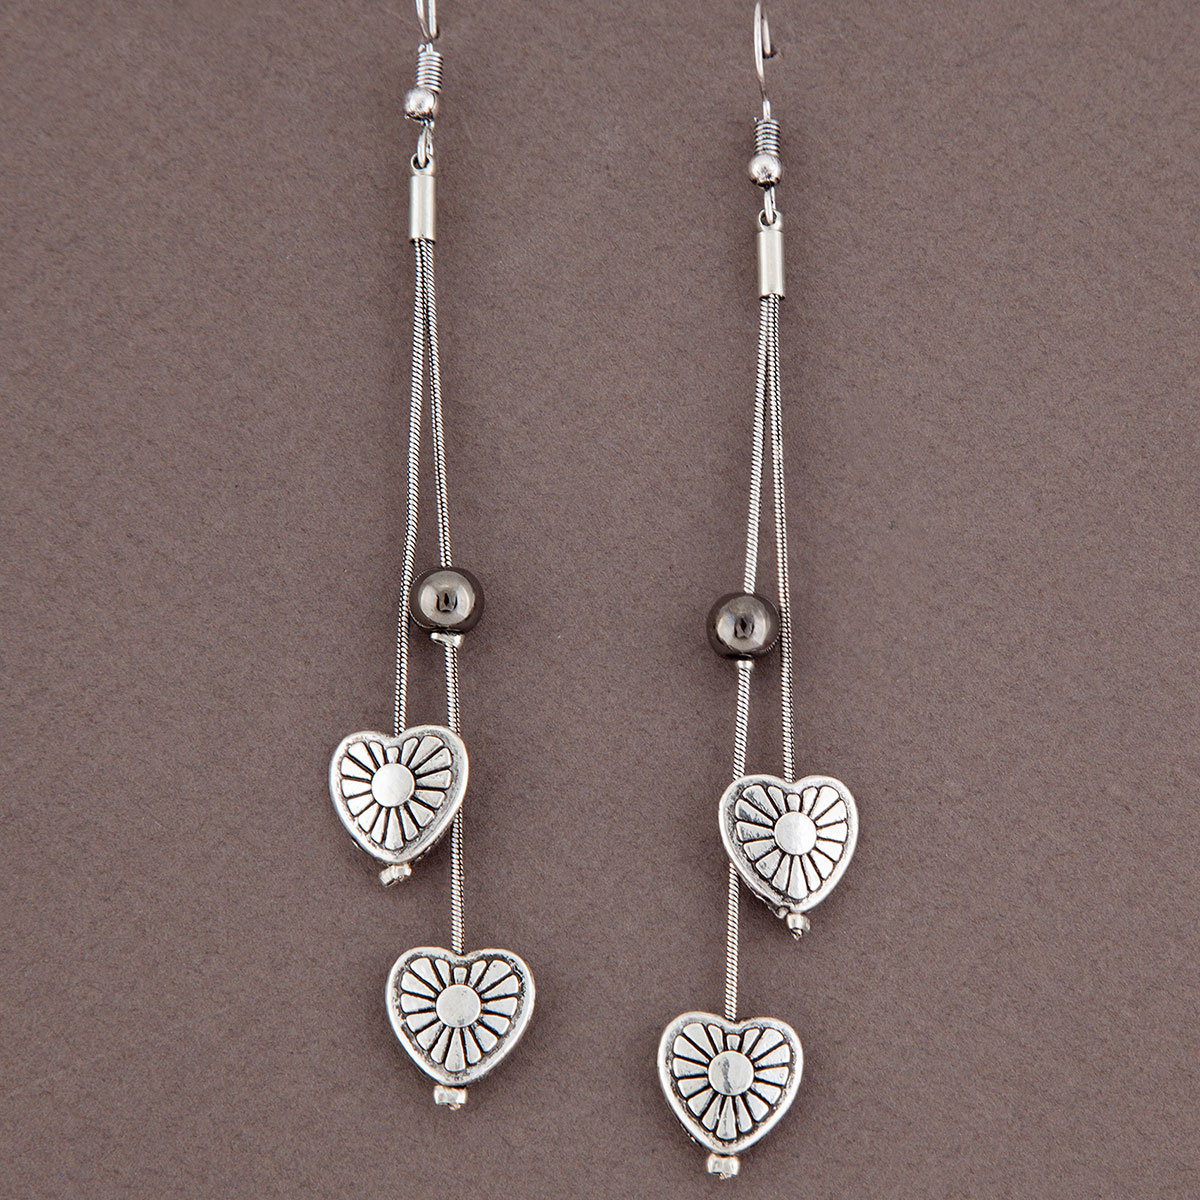 b50 Antique Silver Mini Hearts with Beads French Wire Earrings